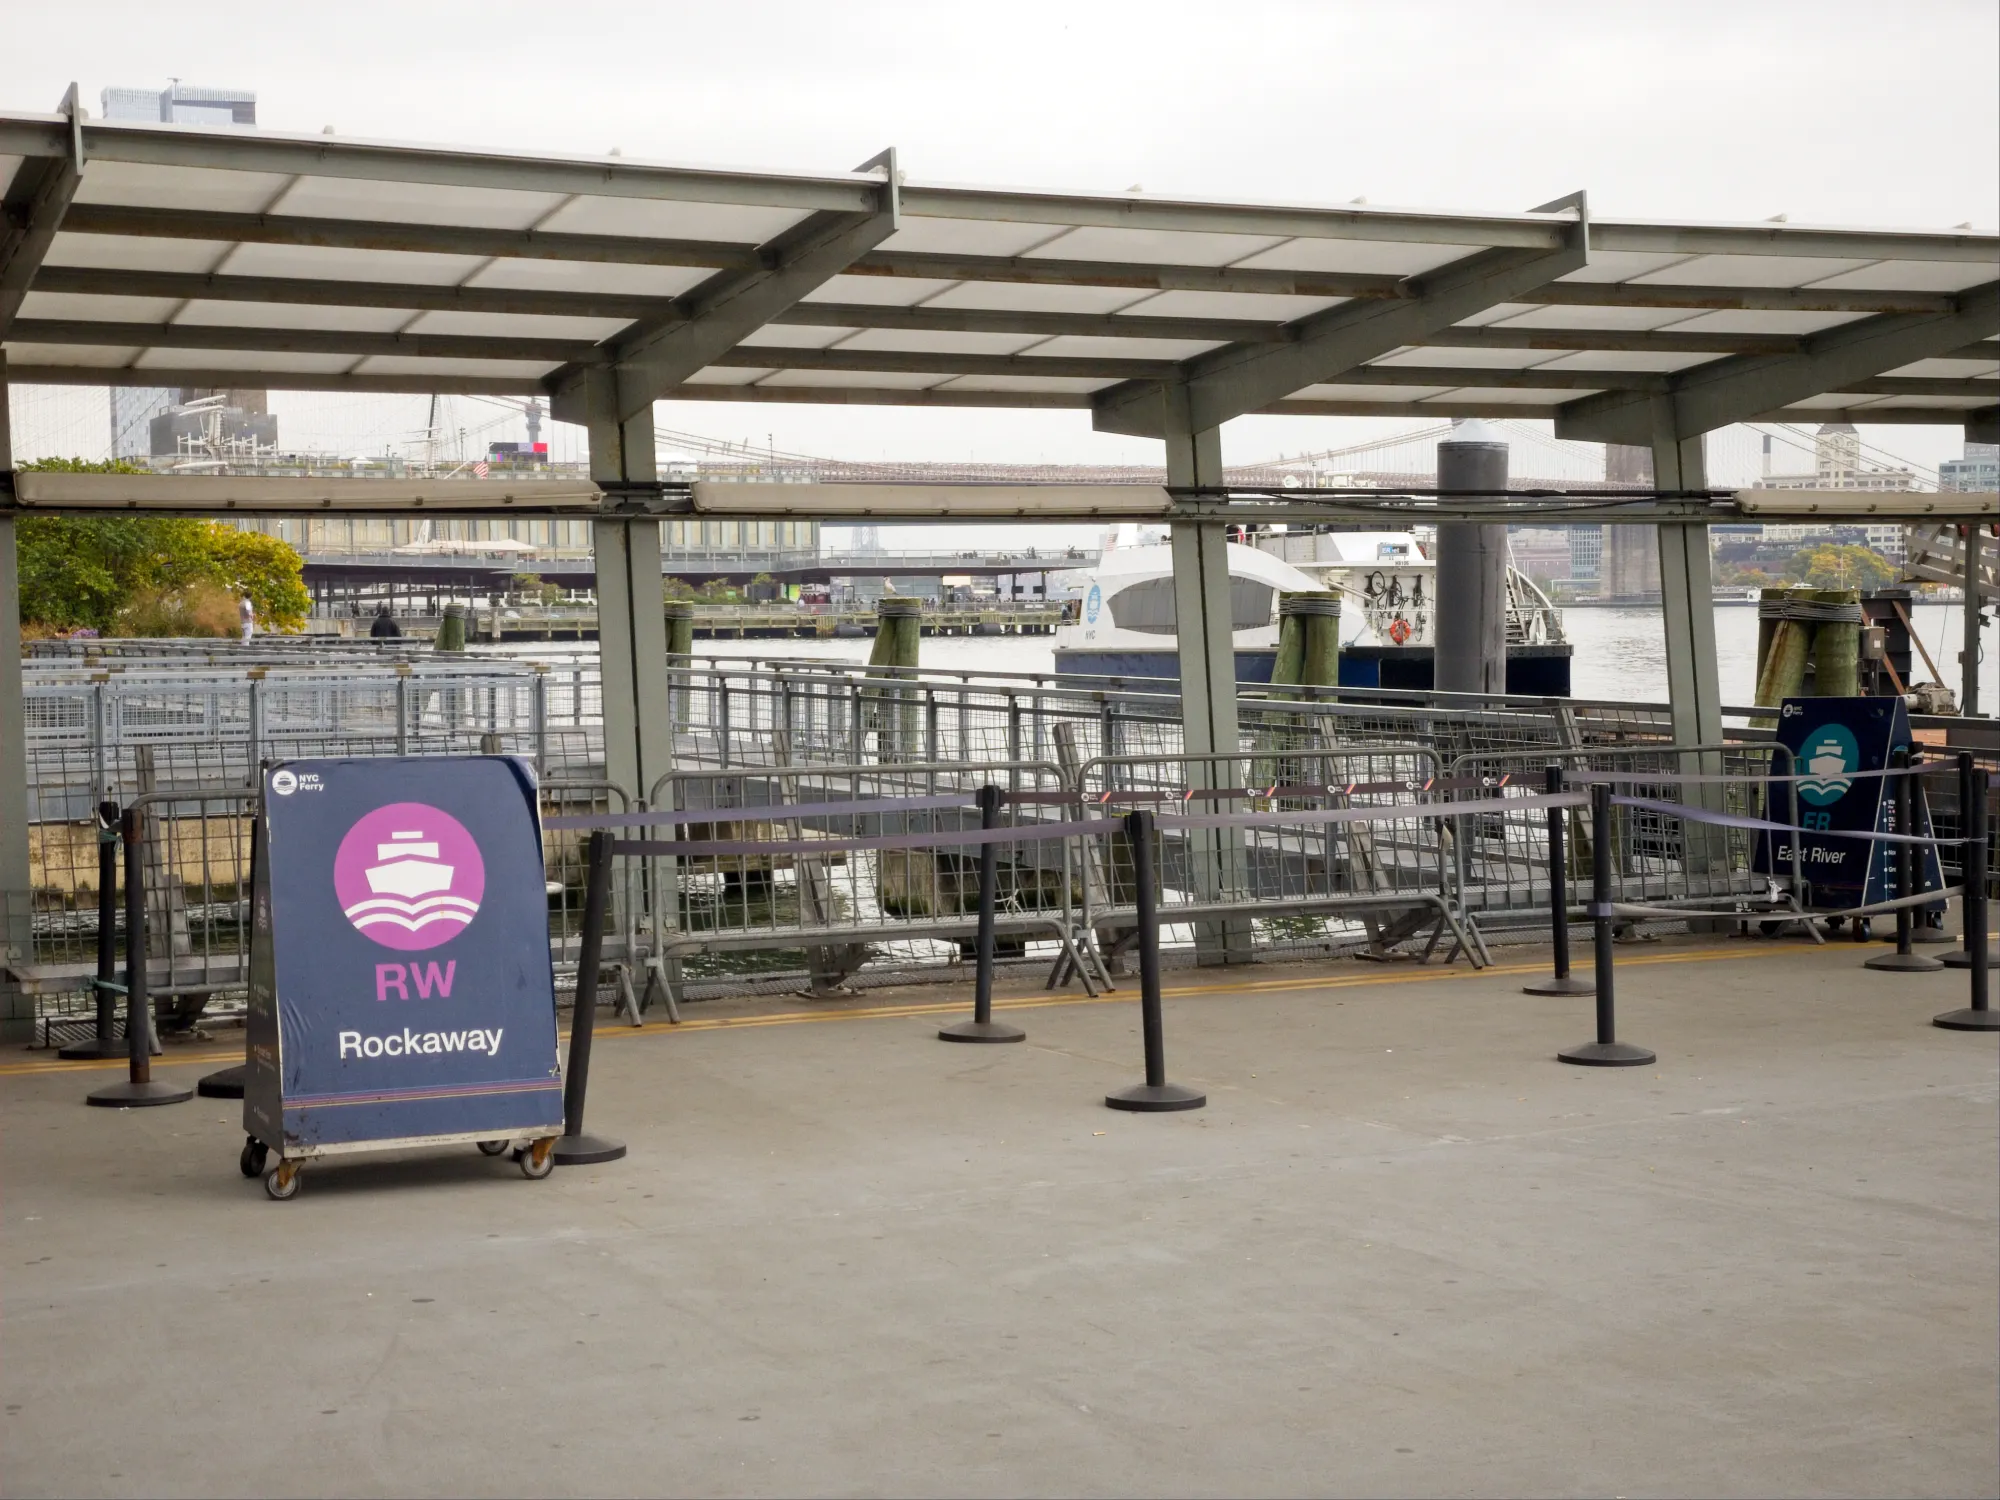 The Wall Street/Pier 11 ferry terminal for the Rockaway Ferry route